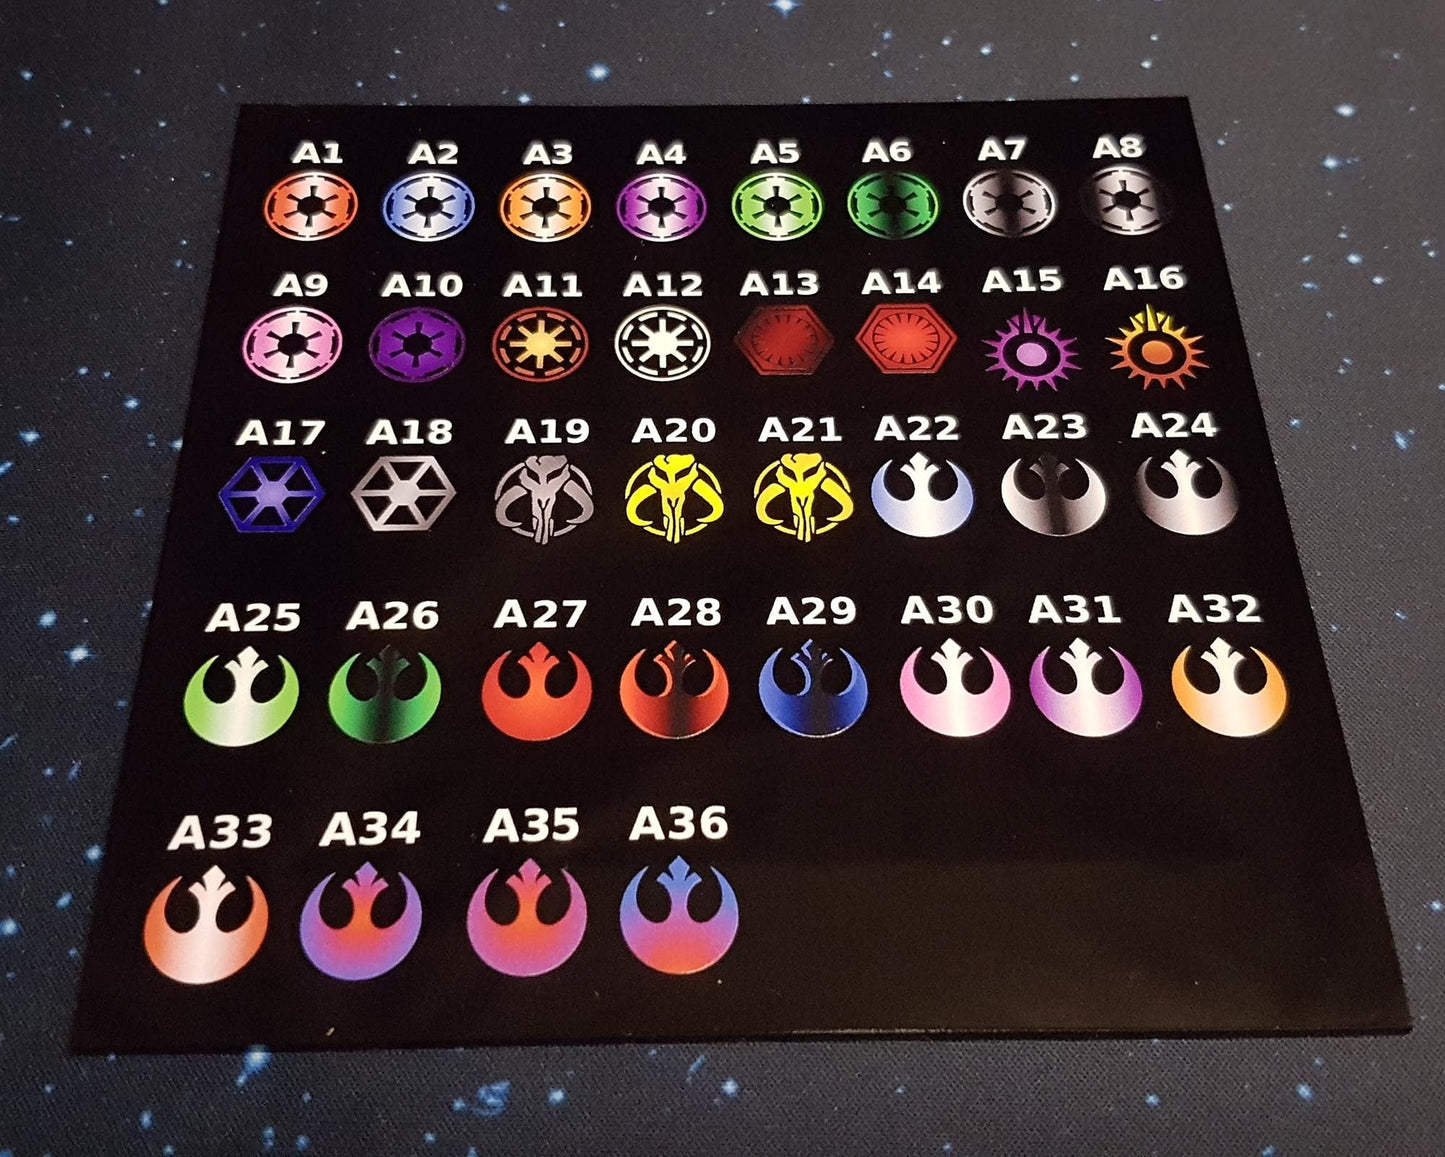 V2 Acrylic Colour Printed Damage Deck Holder (Mandalorian) for Star Wars X-Wing